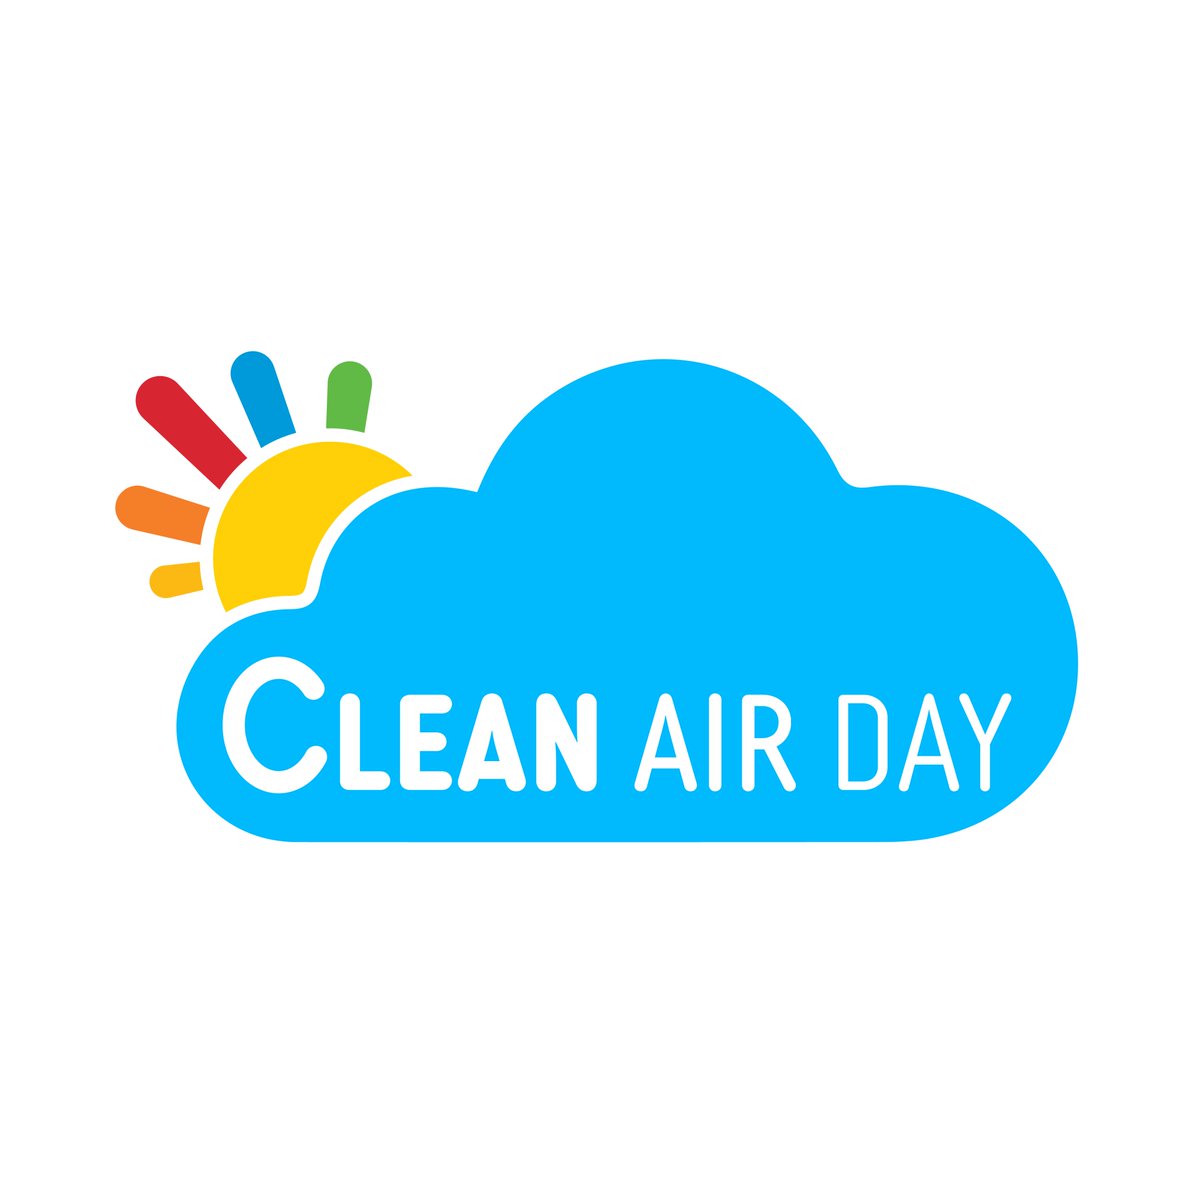 Sign up now! #CleanAirDay Thursday 20 June 2024🌍
Take positive actions to help keep our air clean 👍🏼
Great prizes to be won! 🎁
Register by 12 June 2024.
Hampshire schools register at: tinyurl.com/26t7bf6j
Southampton schools register by emailing: info@myjouneysouthampton.com